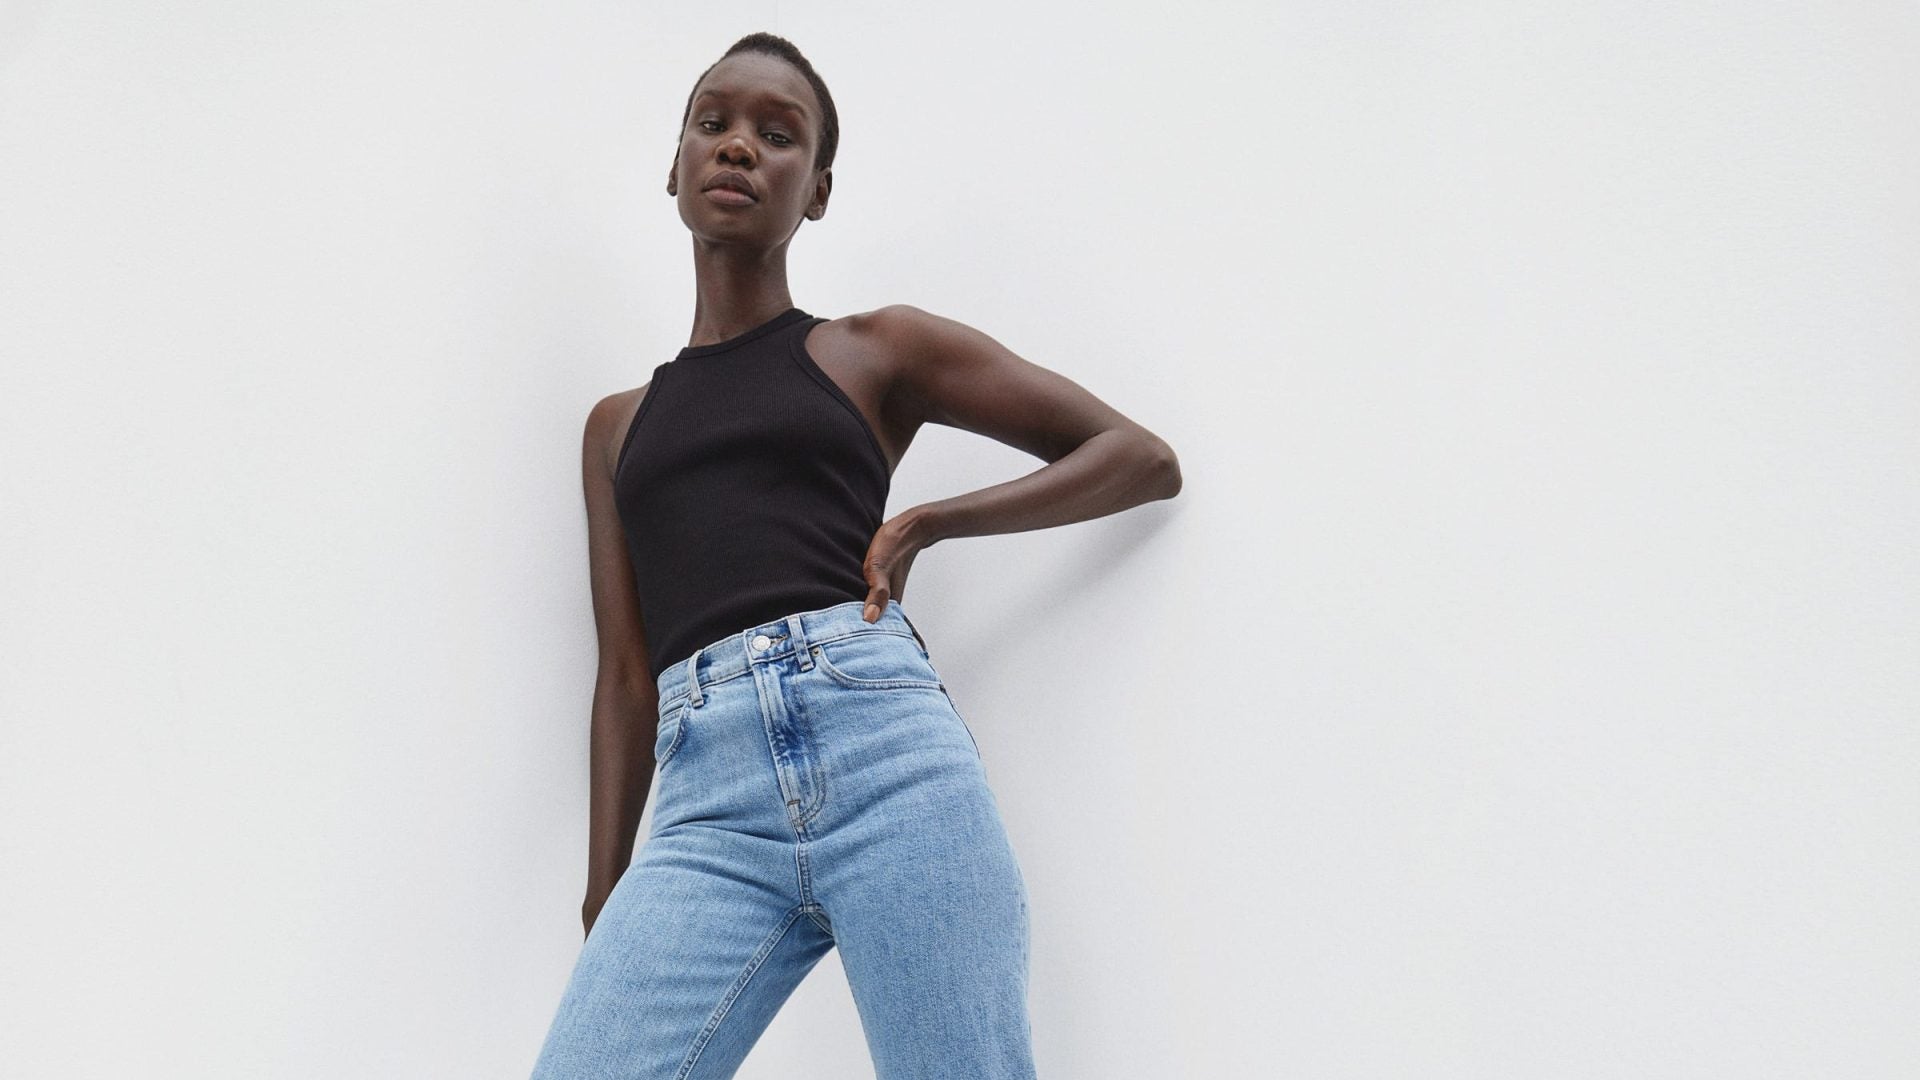 Straight Leg Jeans Are Taking Over – Shop The Denim Trend